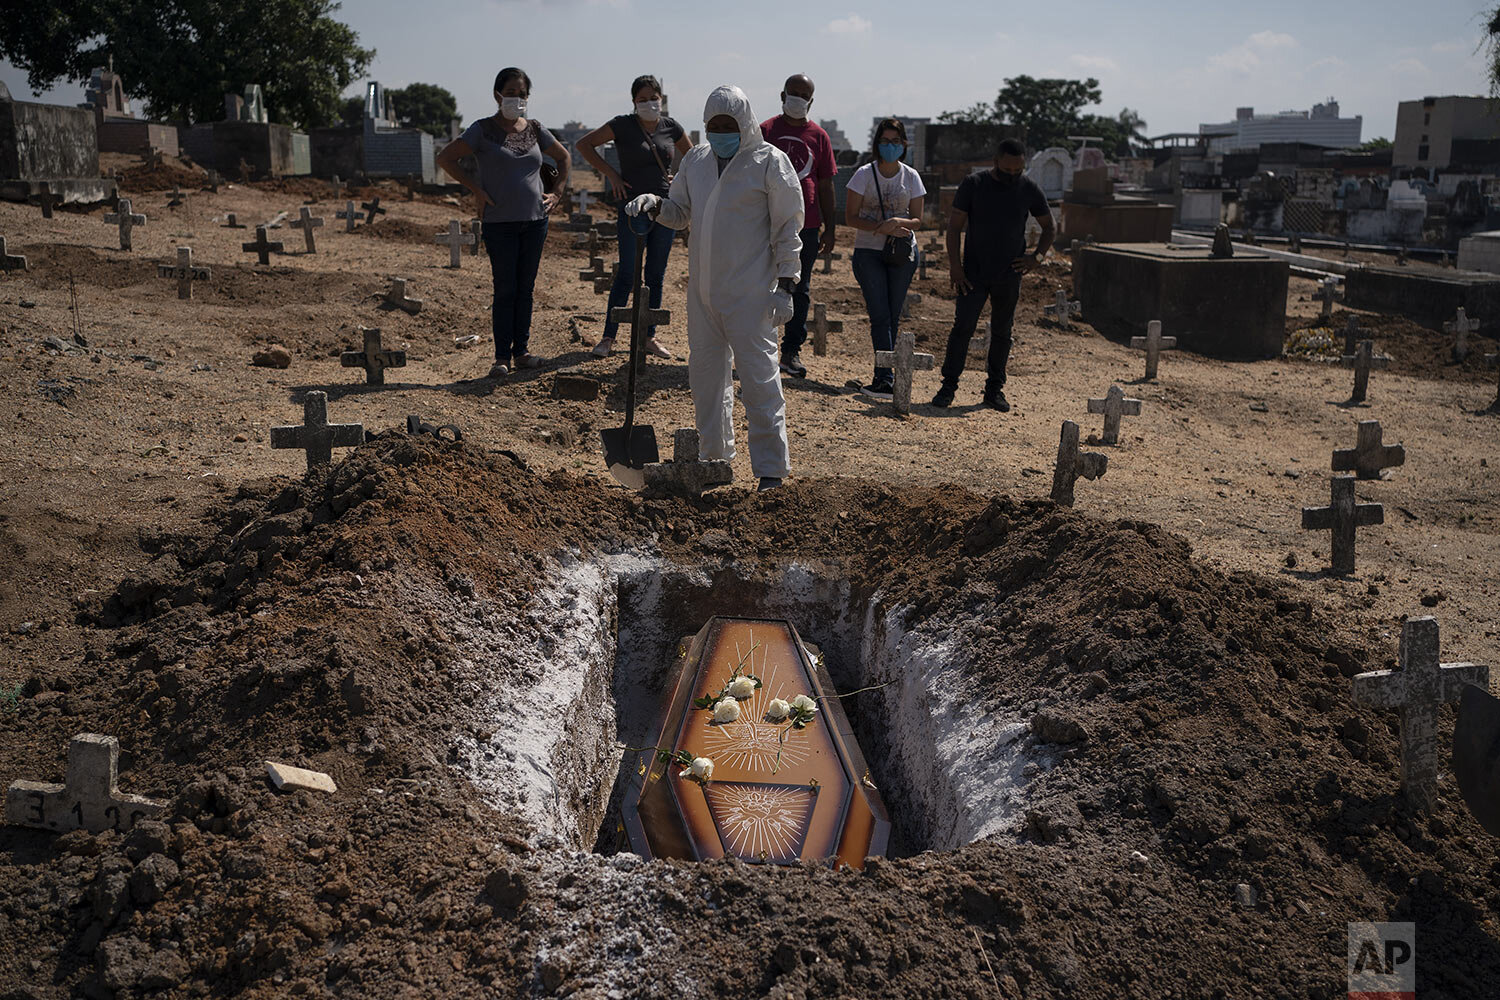  A cemetery worker stands over the remains of Edenir Rezende Bessa, who is suspected of dying of COVID-19, as relatives attend her burial in Rio de Janeiro, Brazil, Wednesday, April 22, 2020. After visiting 3 primary care health units, she was accept